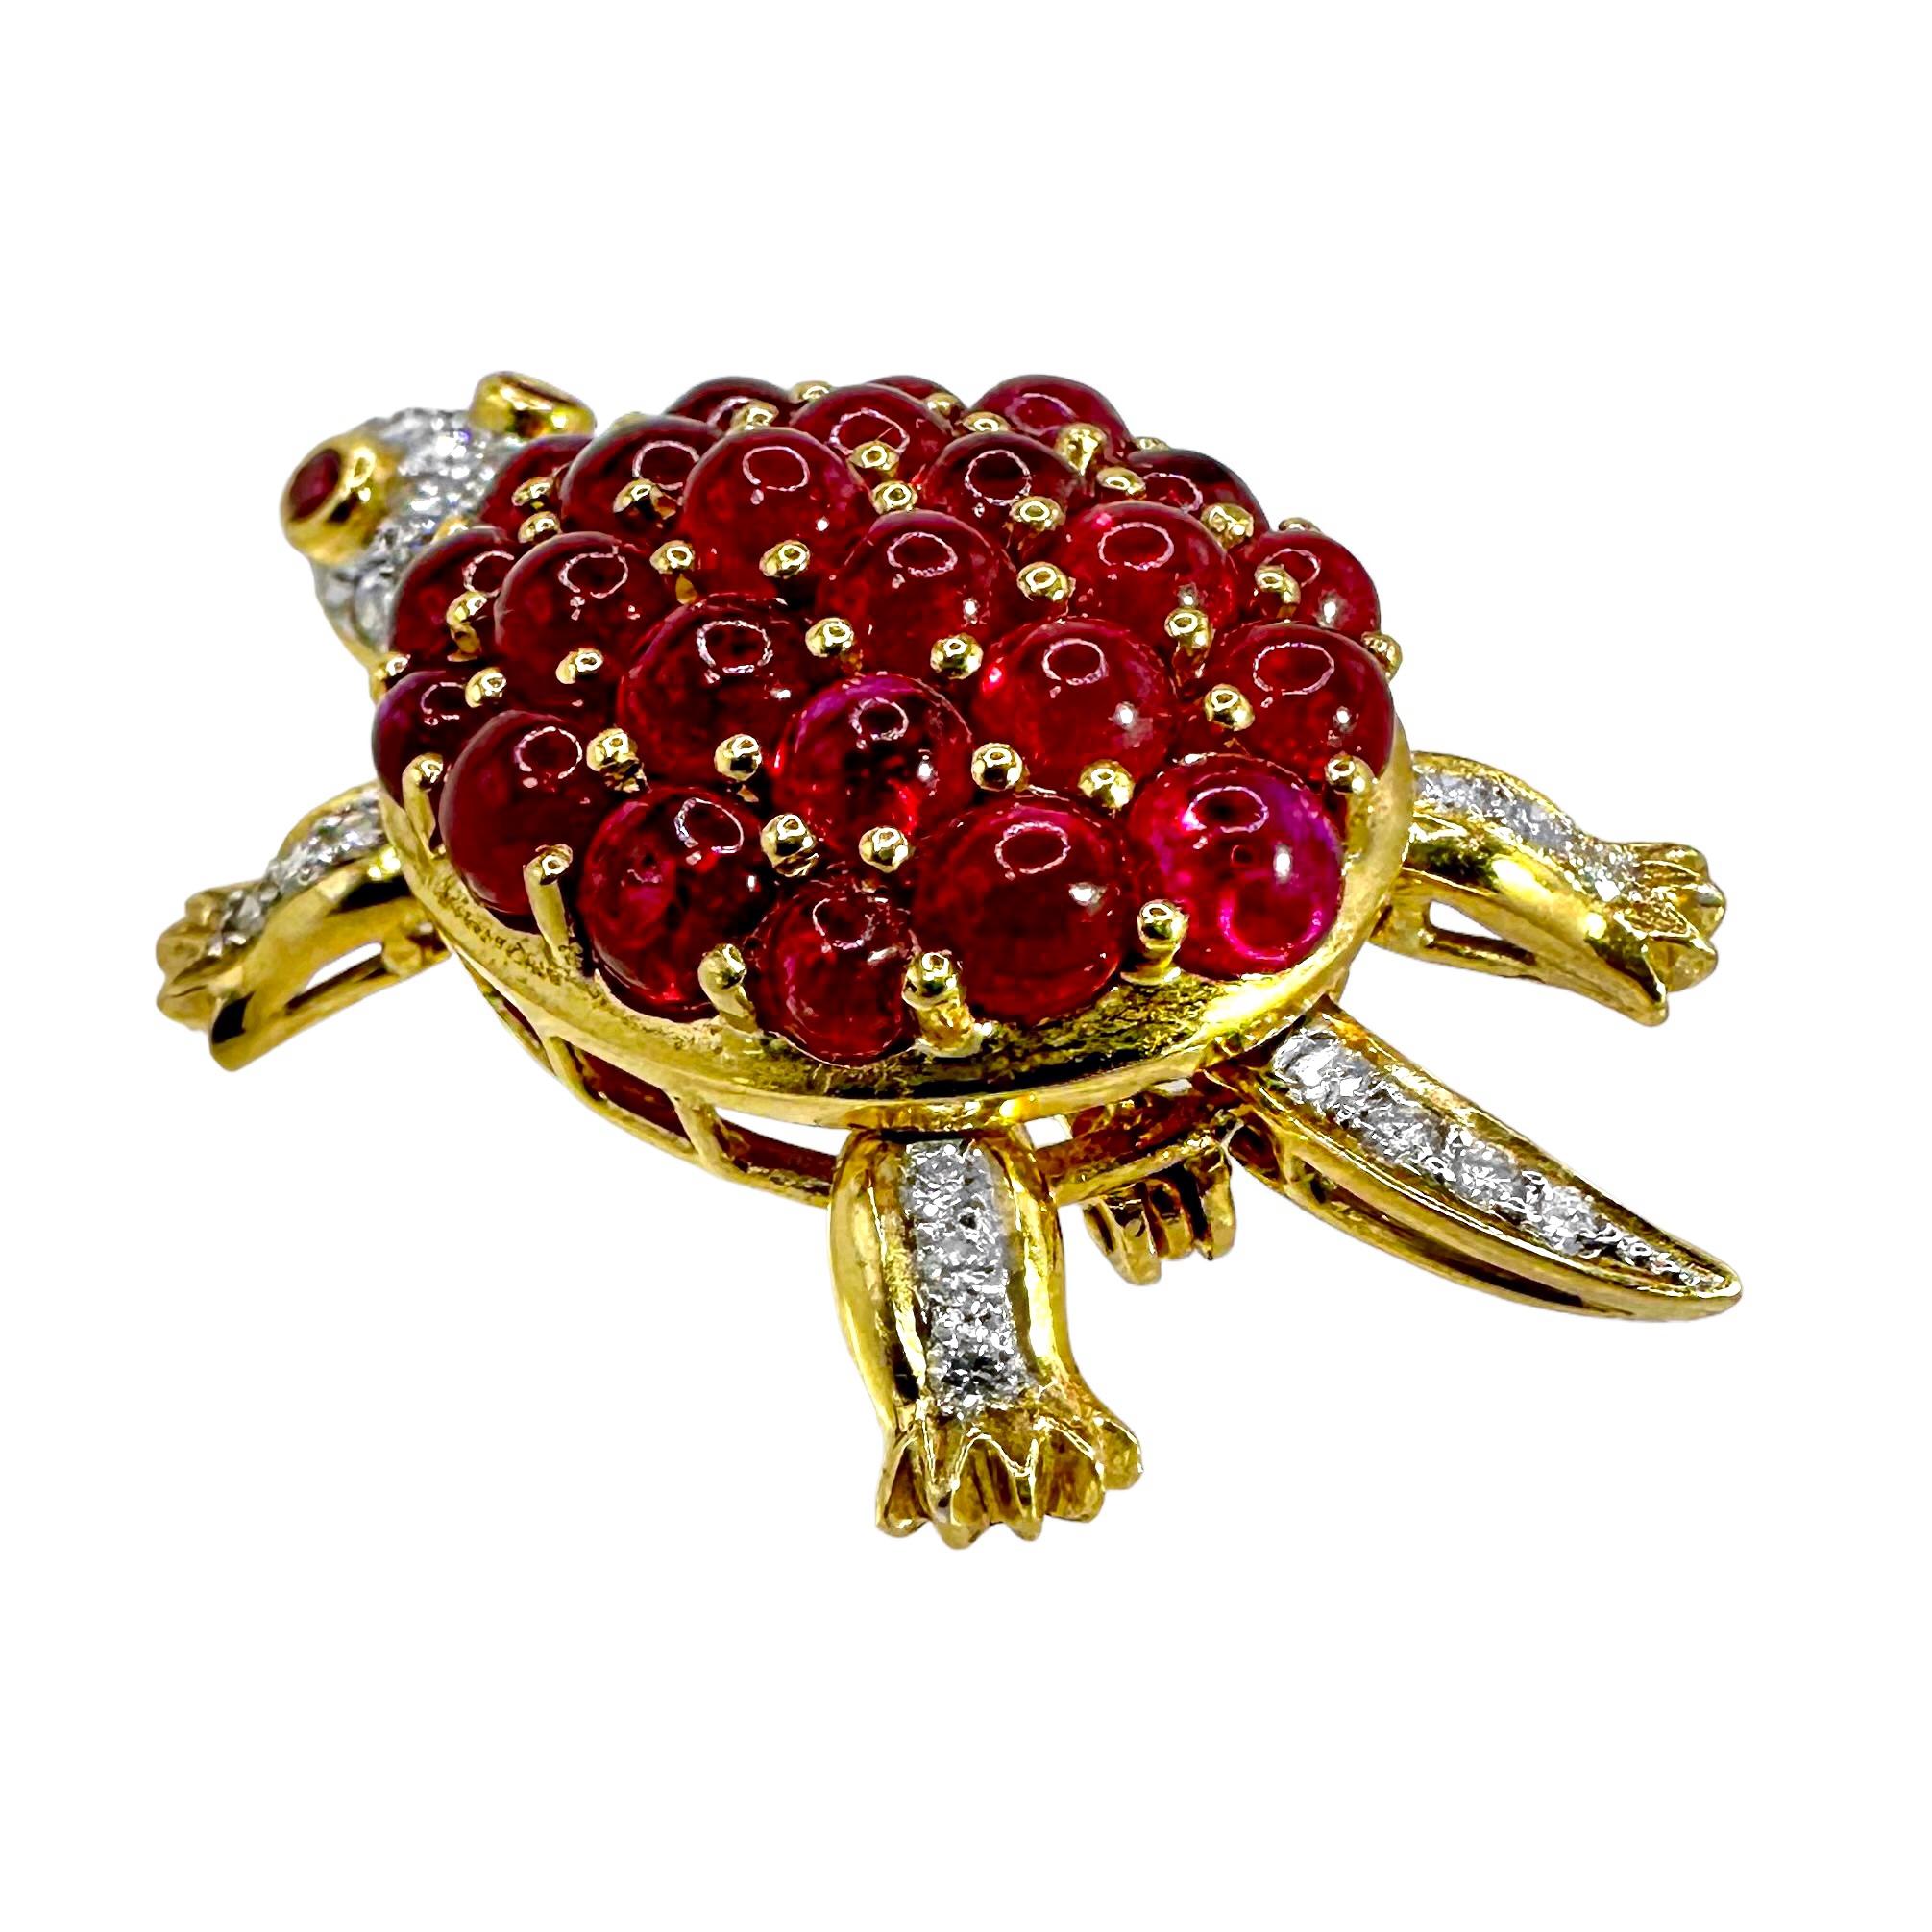 Modern Adorable Turtle Brooch/Pendant with Motion in 18K Gold, Diamonds, and Rubies For Sale